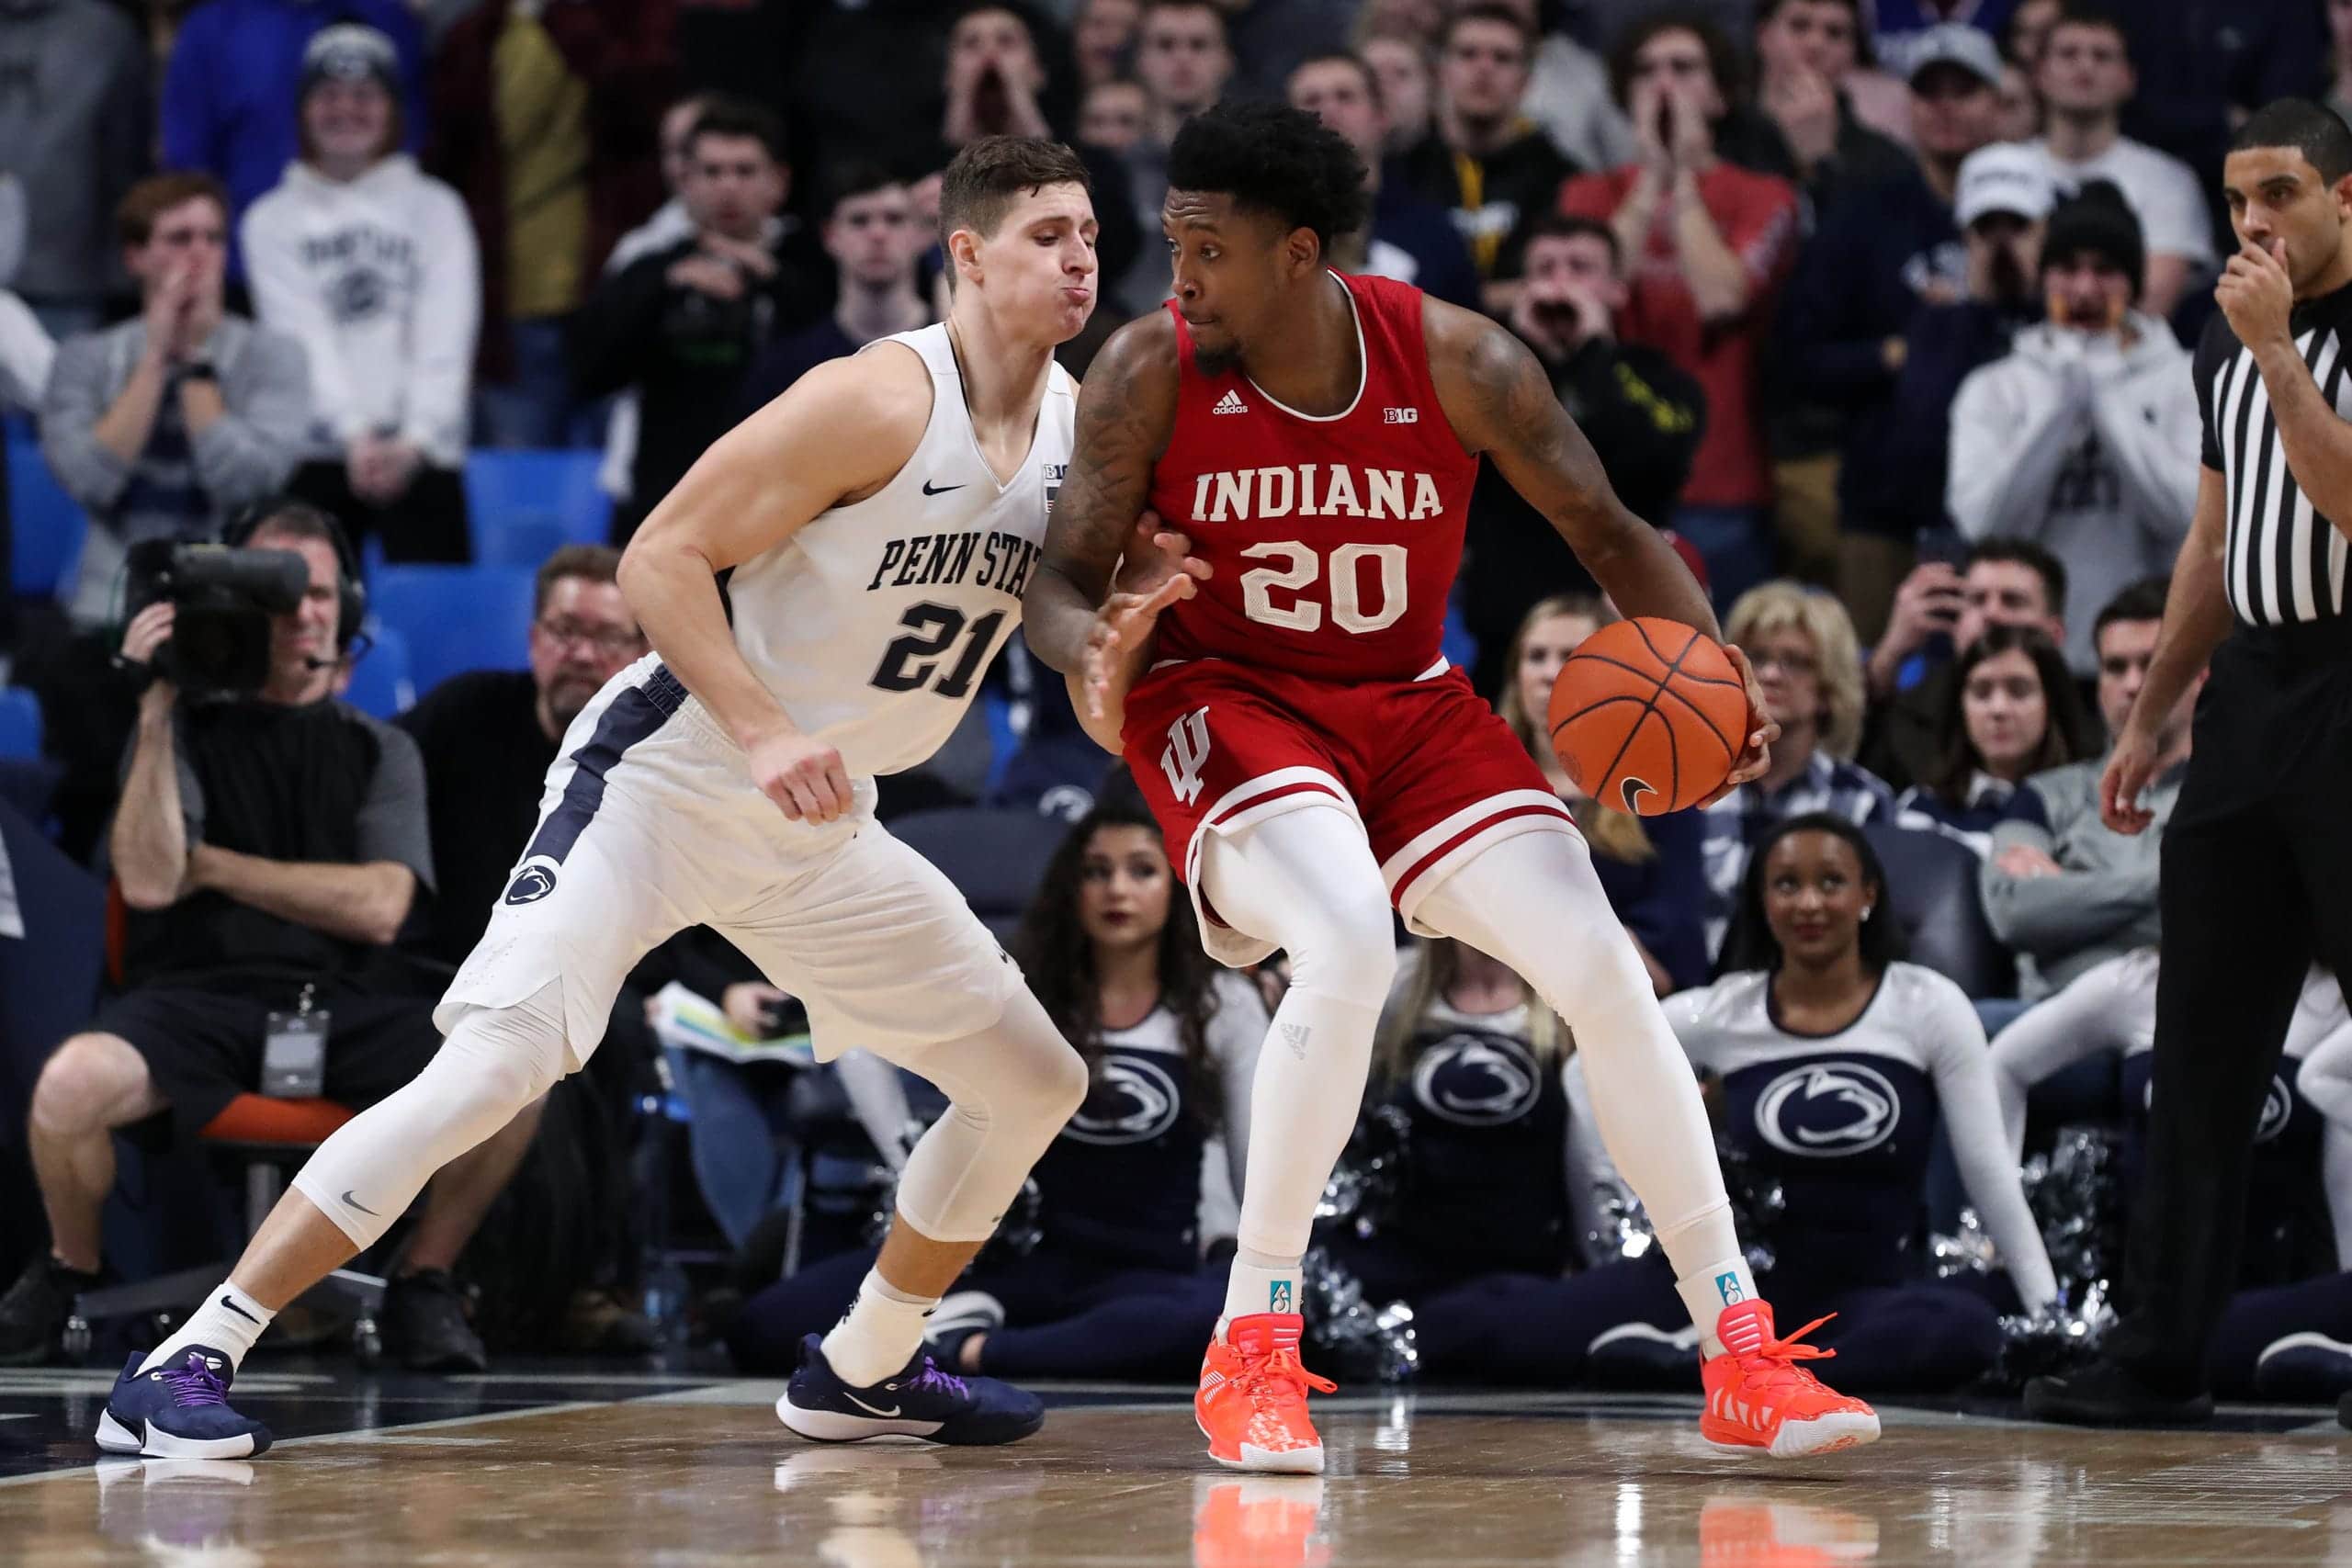 Penn State Nittany Lions at Indiana Hoosiers